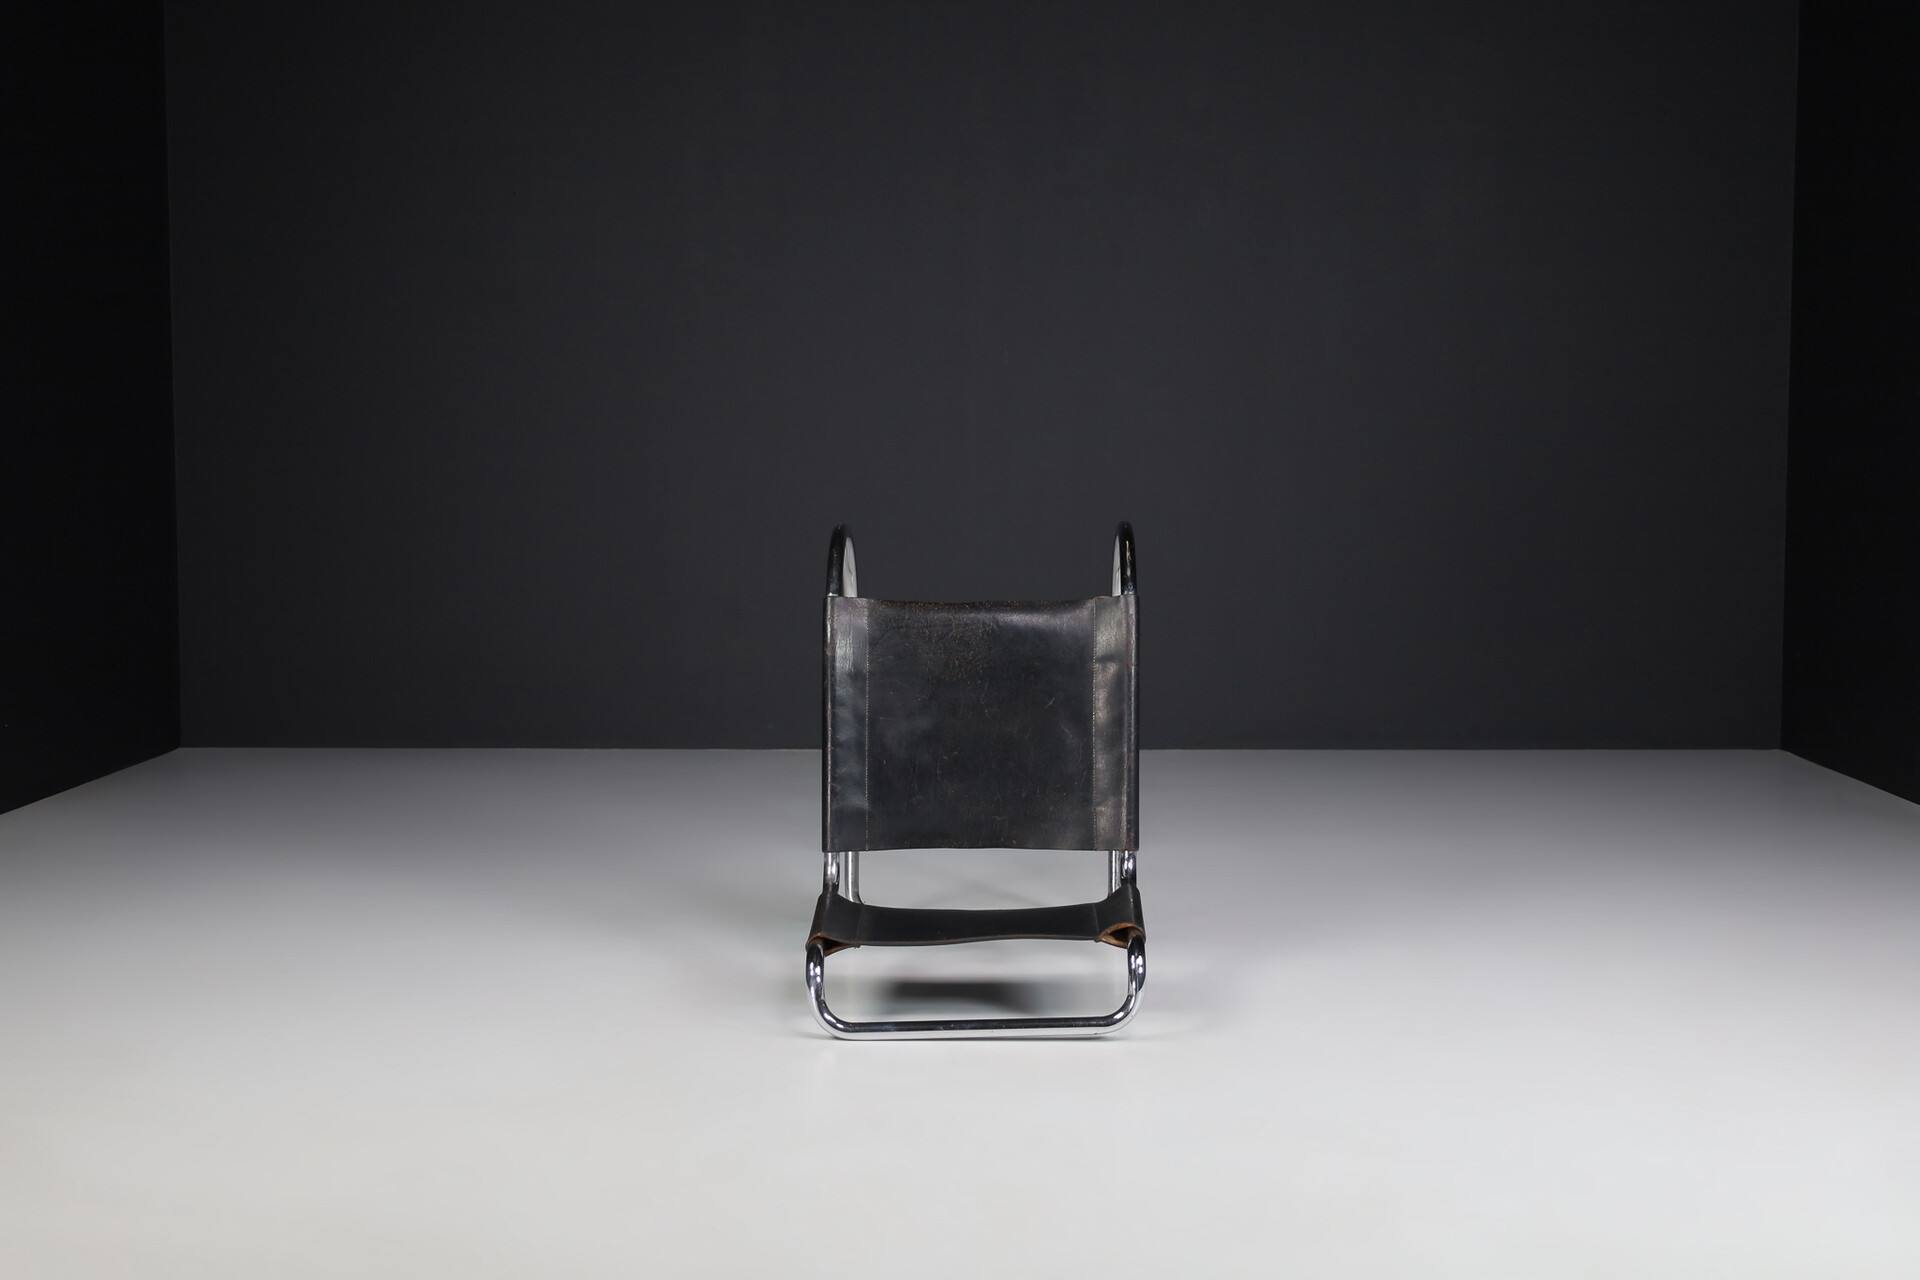 Bauhaus MR10 Cantilever Chair by Ludwig Mies van der Rohe Germany 1950s Mid-20th century